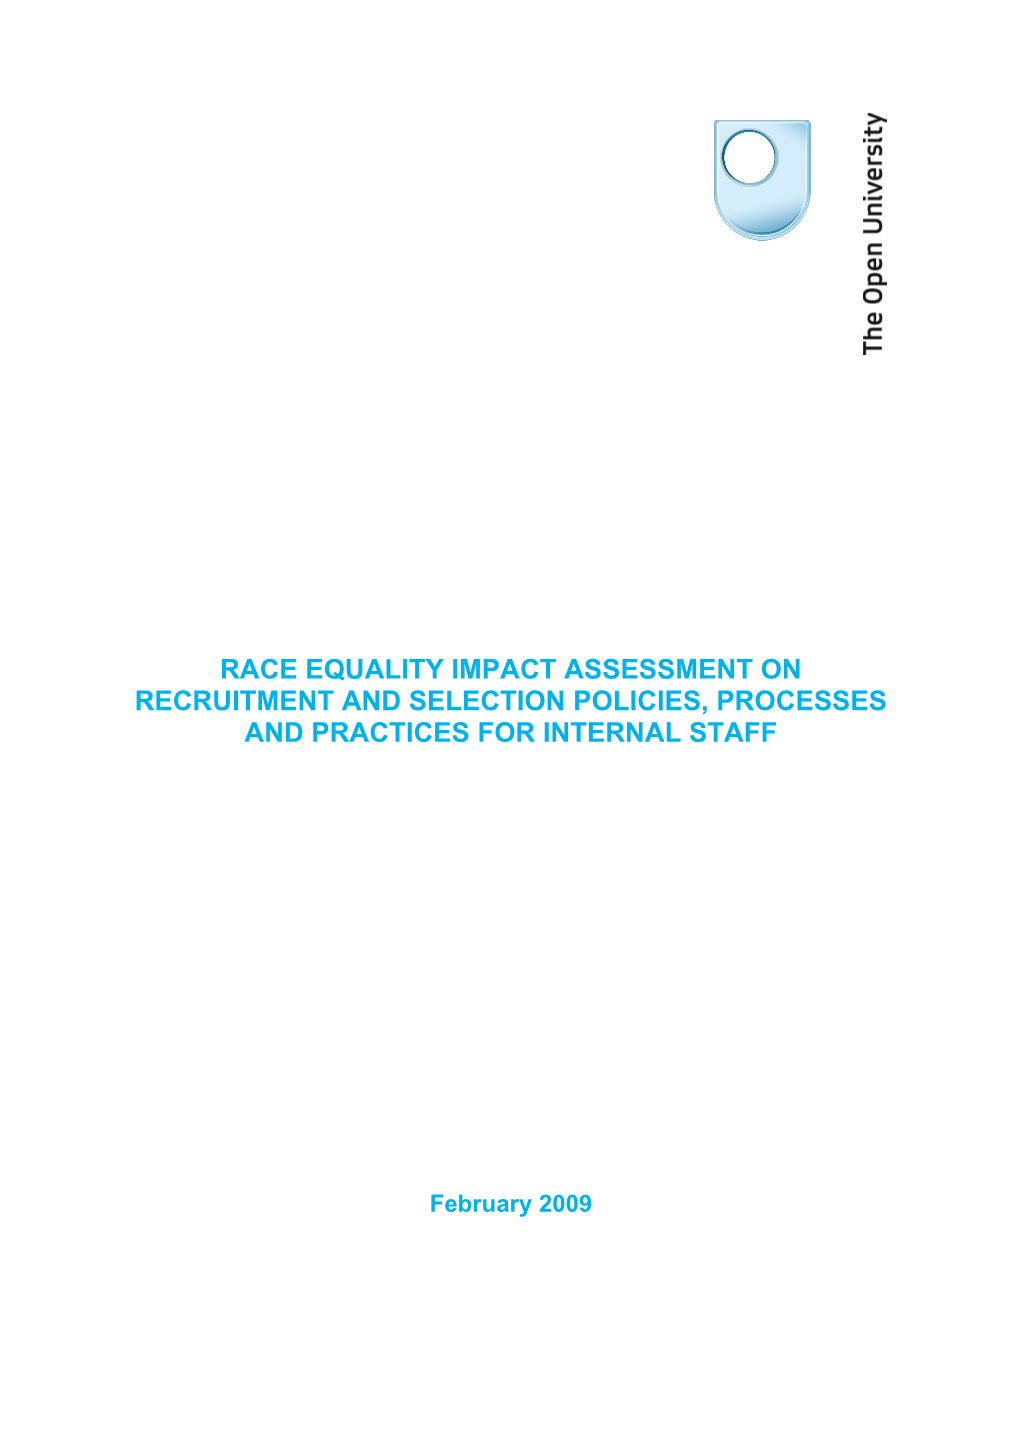 Race Equality Impact Assessment on Recruitment and Selection Policies